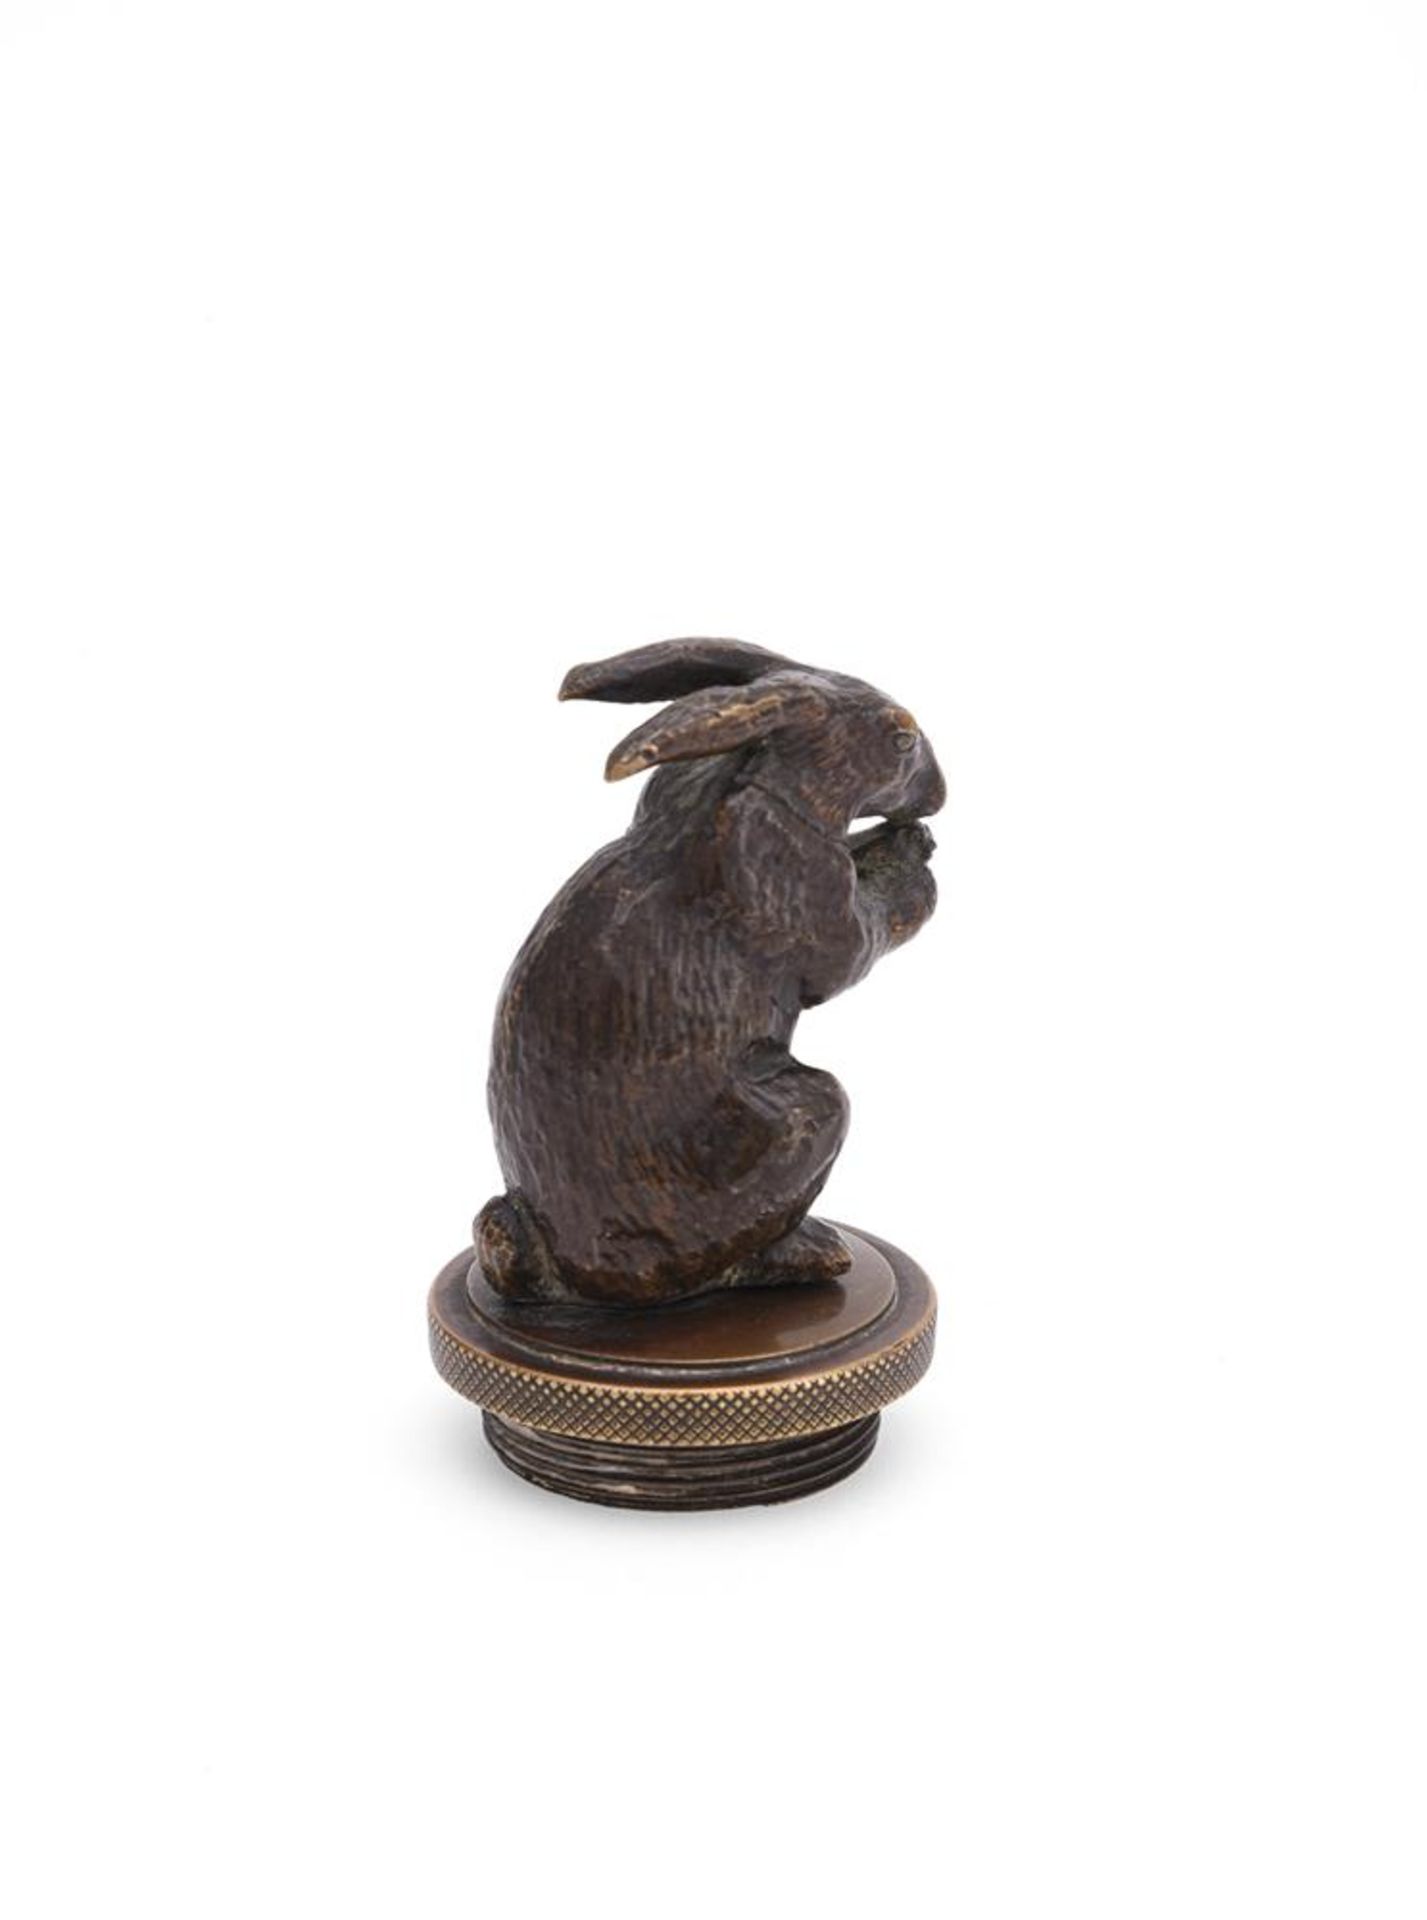 FRENCH SCHOOL, A BRONZE RADIATOR CAP MODELLED AS A STANDING RABBIT - Image 3 of 4